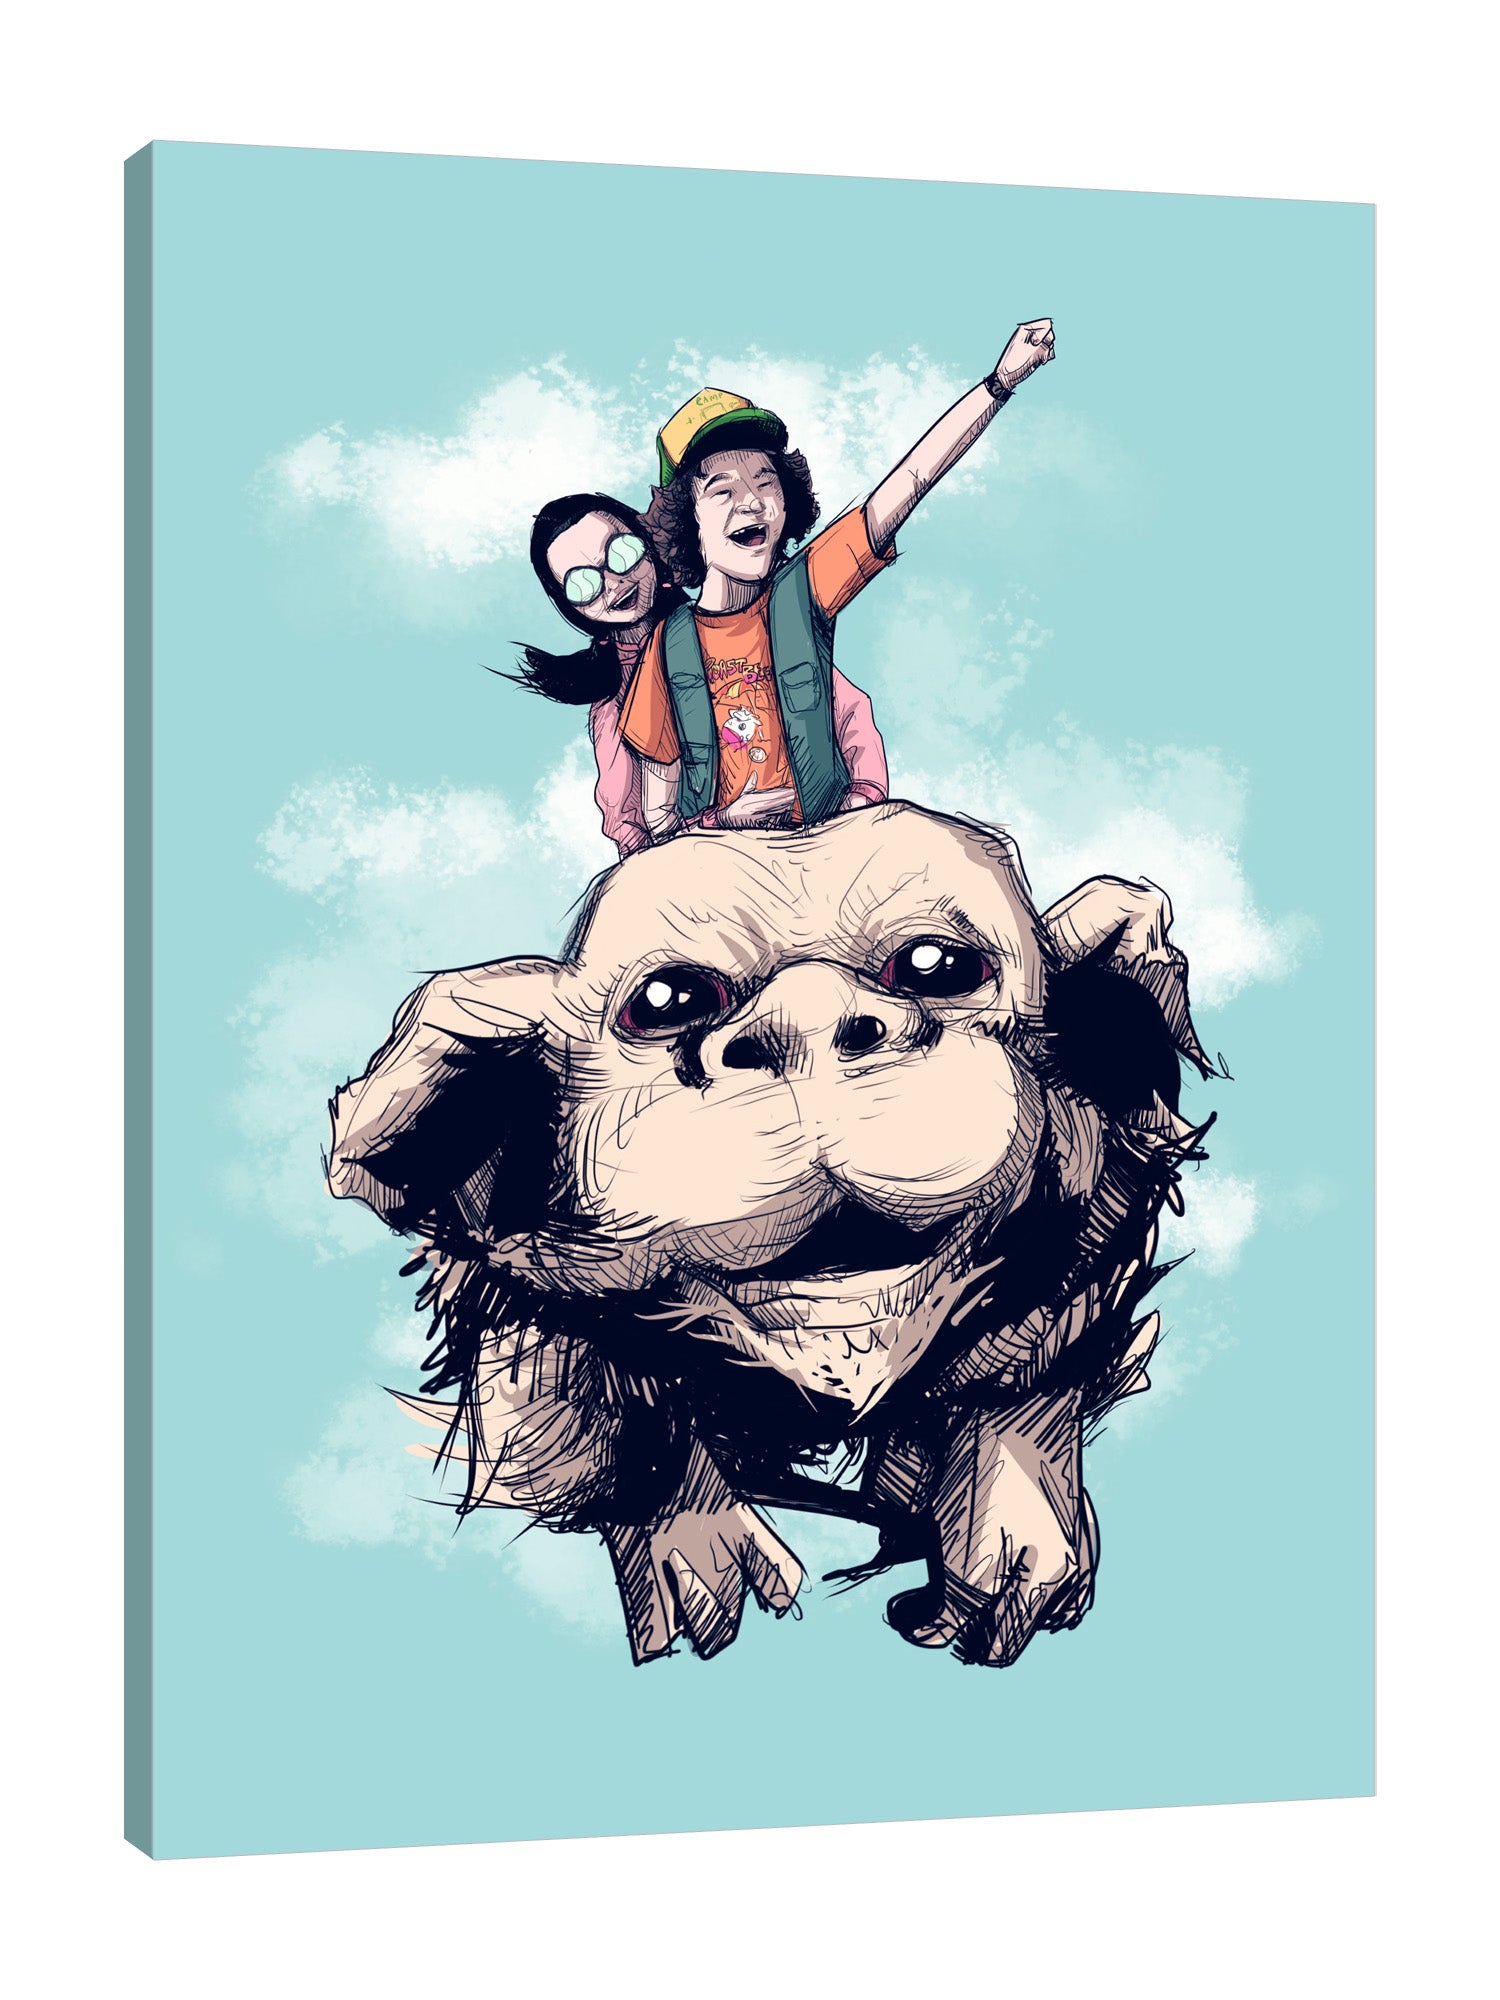 Ludwig-Van-Bacon,Vertical,3X4,Modern & Contemporary,Entertainments,Humor,People,Animals,Fantasy & Sci-Fi,never ending,neverending story,movies,movie,entertainment,humor,animals,animal,dog,dogs,flying dog,dustin,cinema,Blue,Red,Magenta Red,Black,Gray,Charcoal Gray,Sea Green,Lime Green